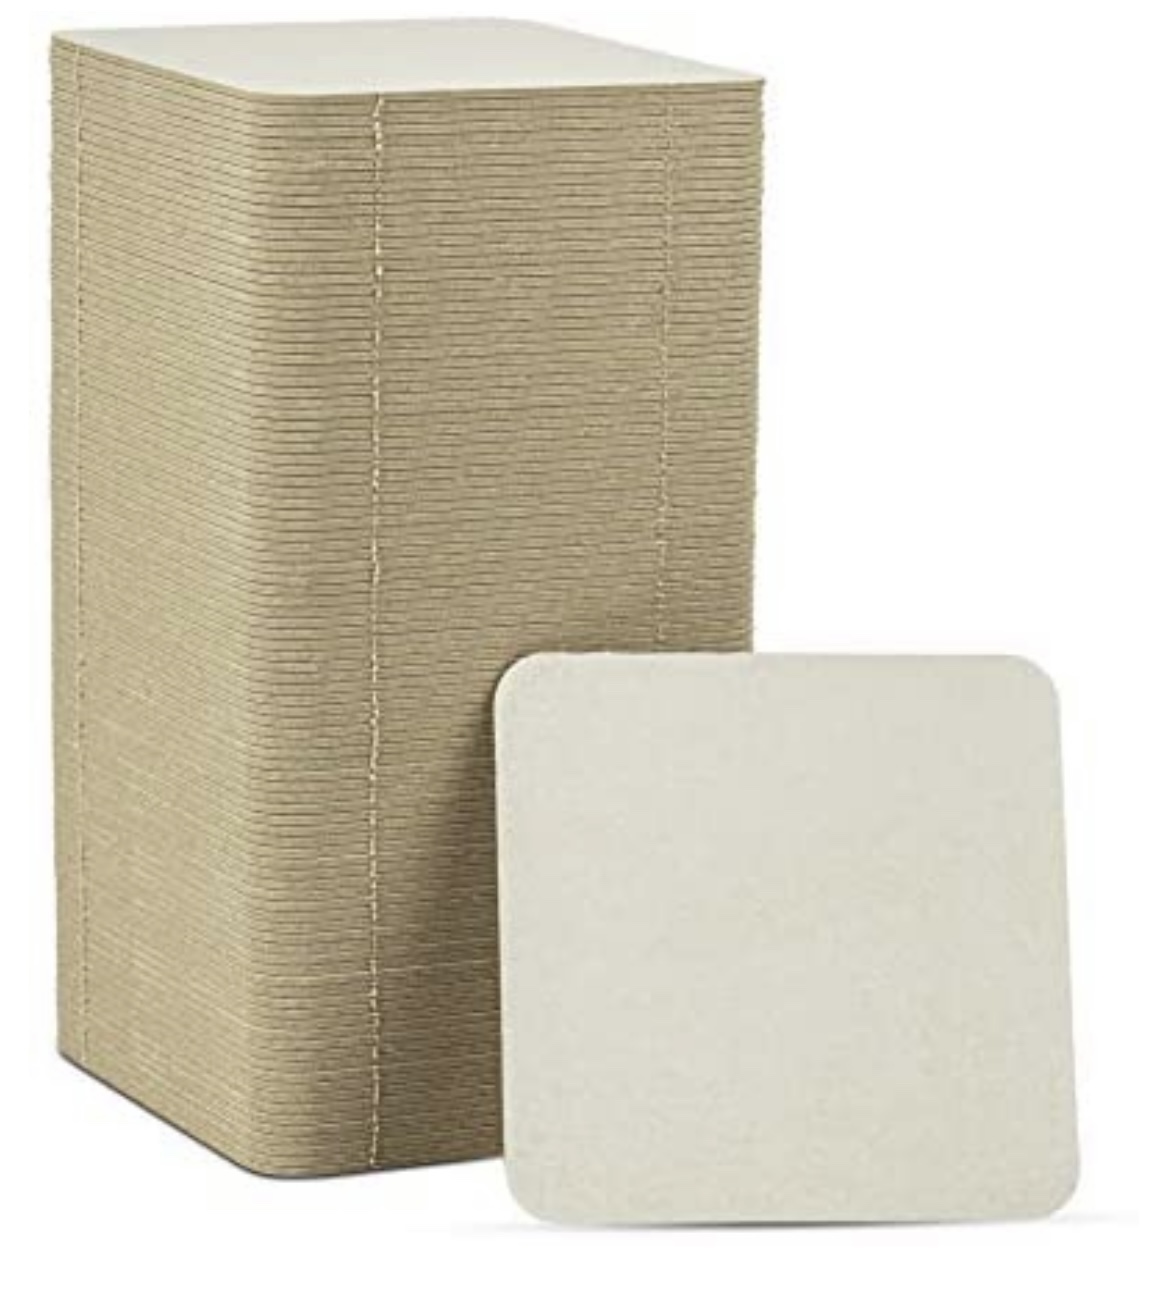 4” Square Blank Medium Weight Off-White Cardboard Coasters for Your Beverages - 125/pack